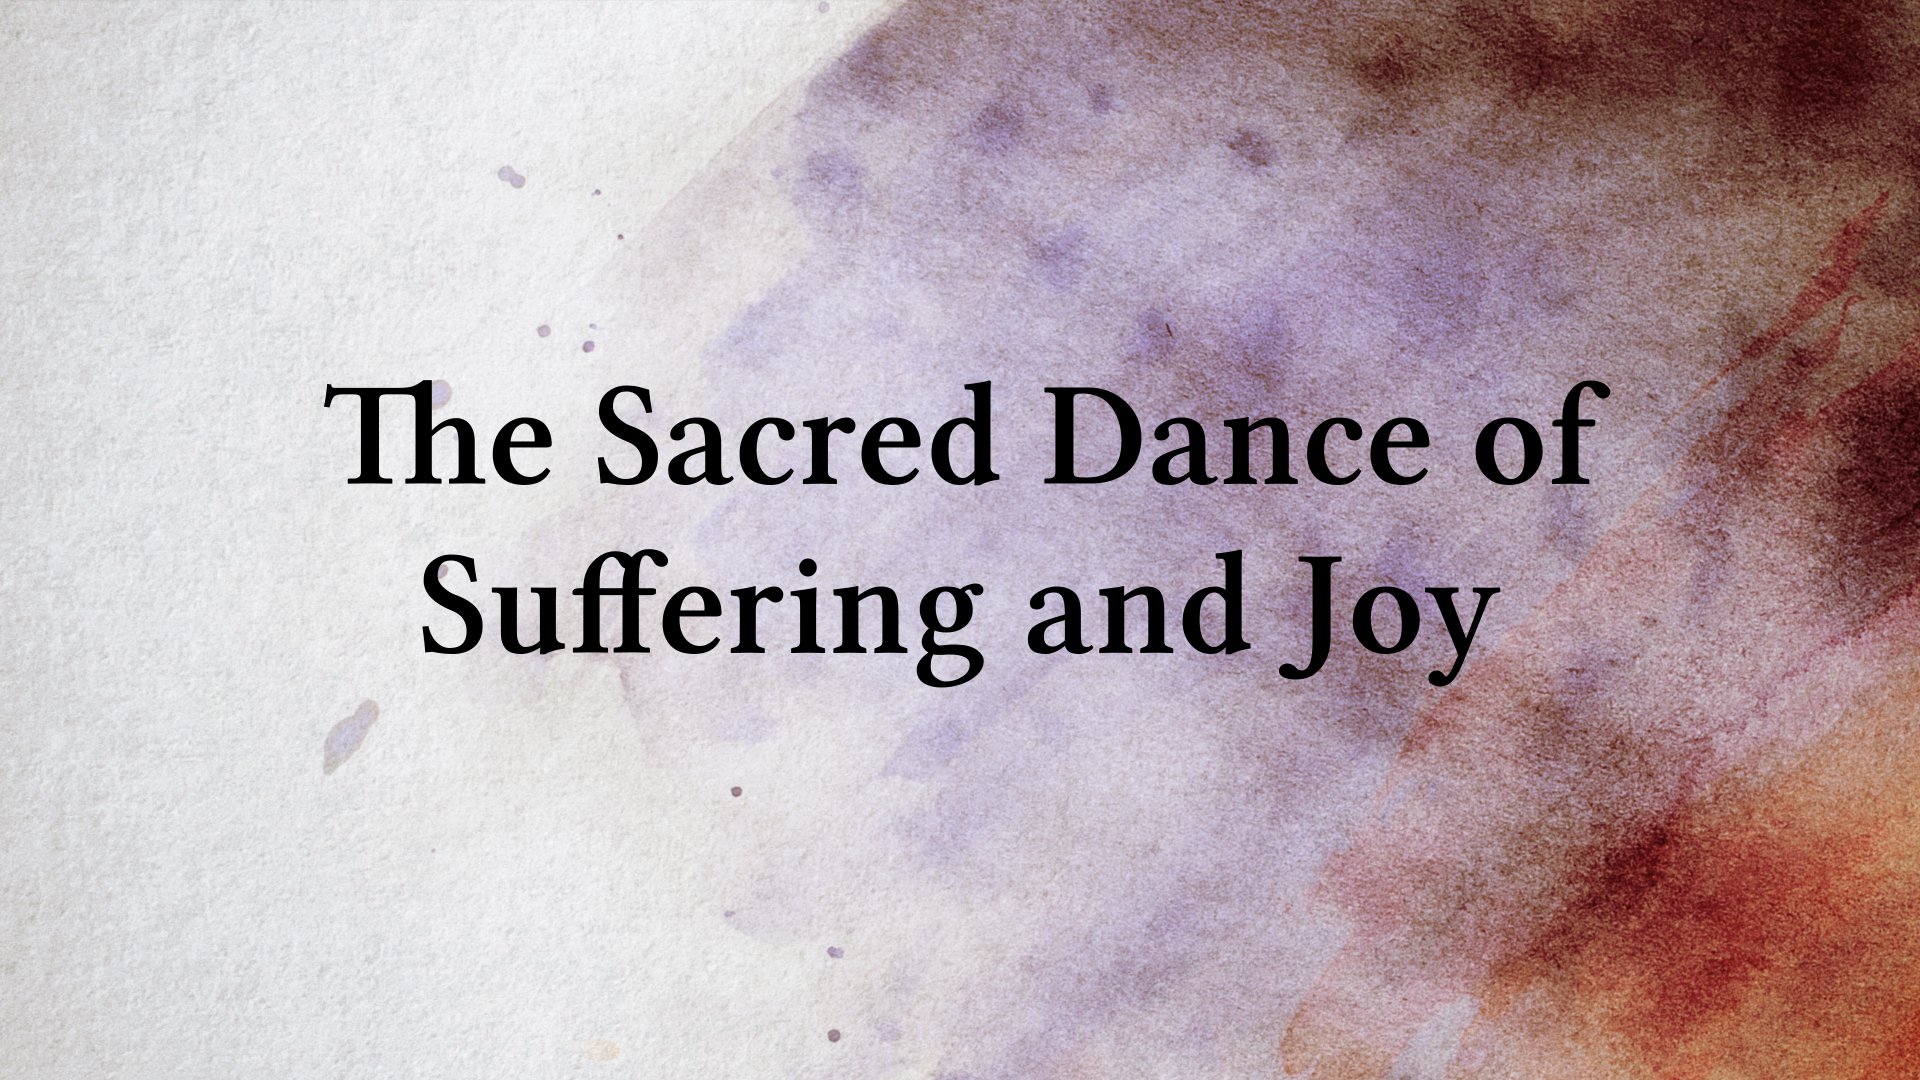 The Sacred Dance of Suffering and Joy